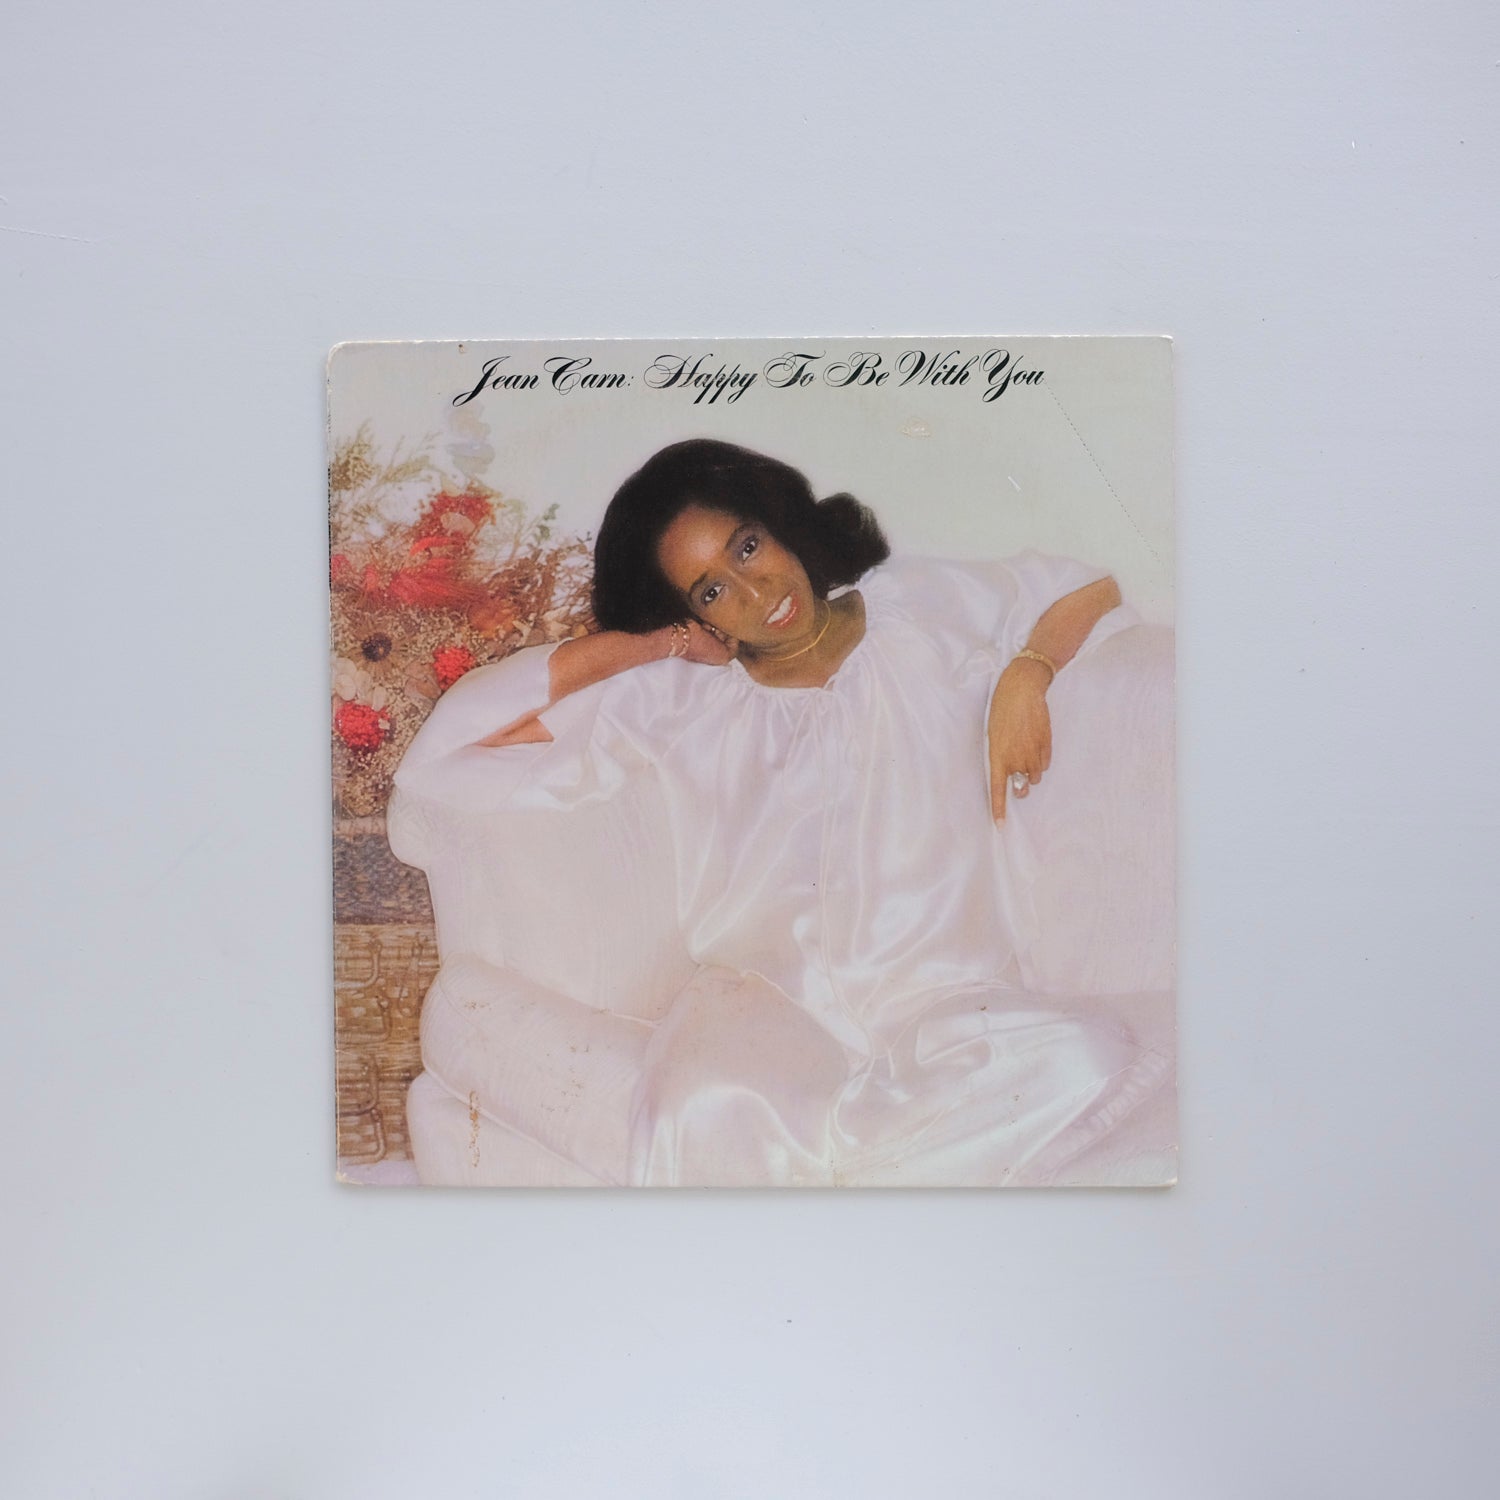 Jean Carn - Happy To Be With You [promo]